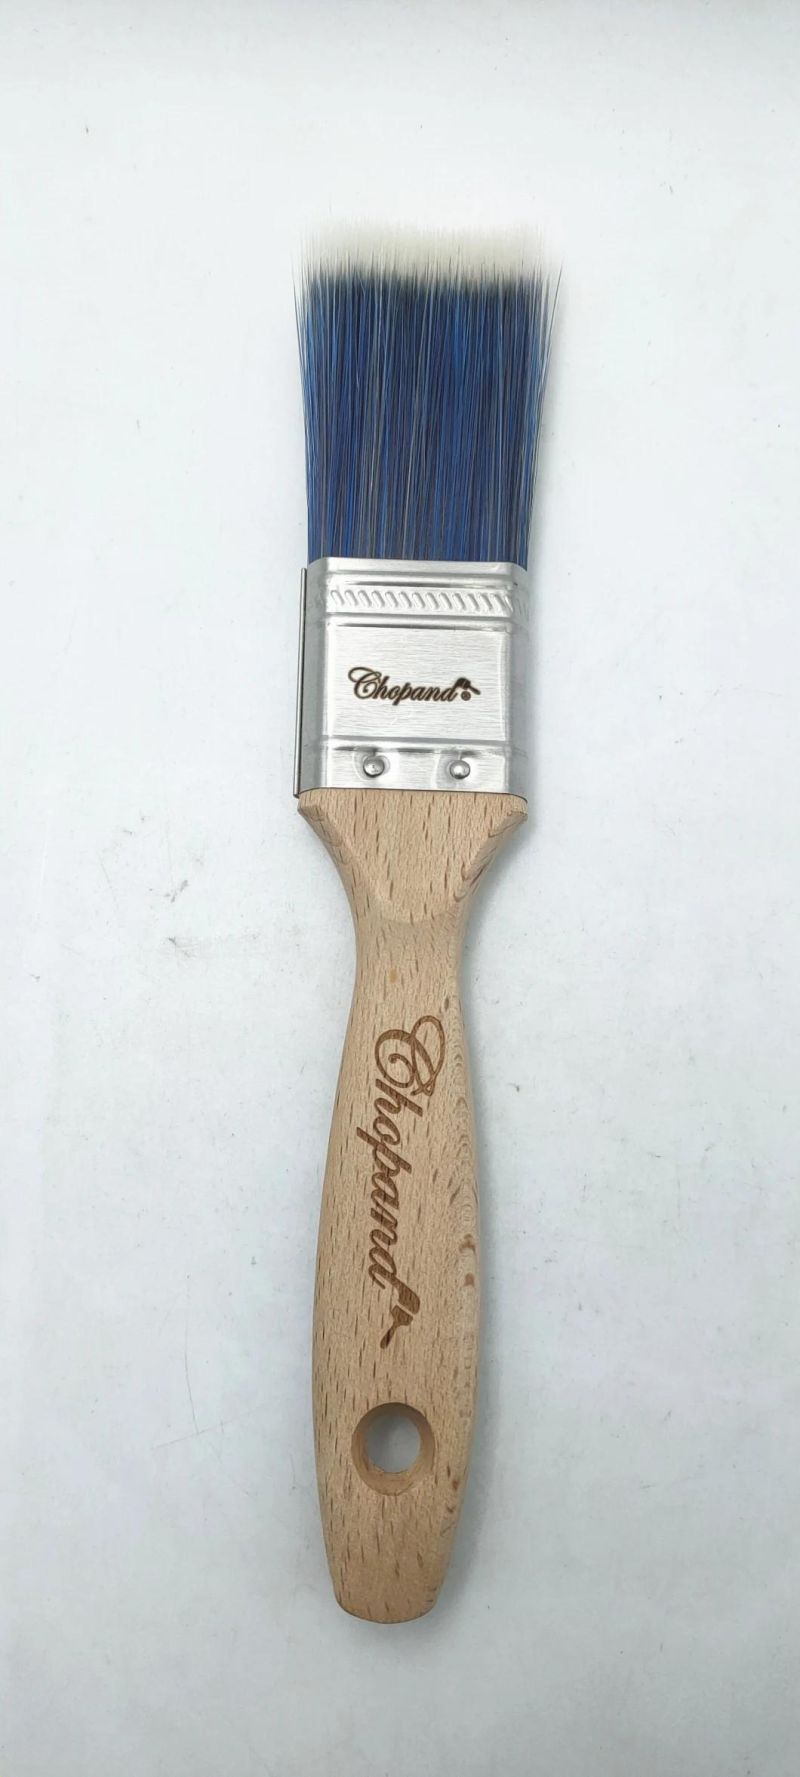 Hotsale in USA Professional High Quality 1.5inch Stainless Steel Paint Brush